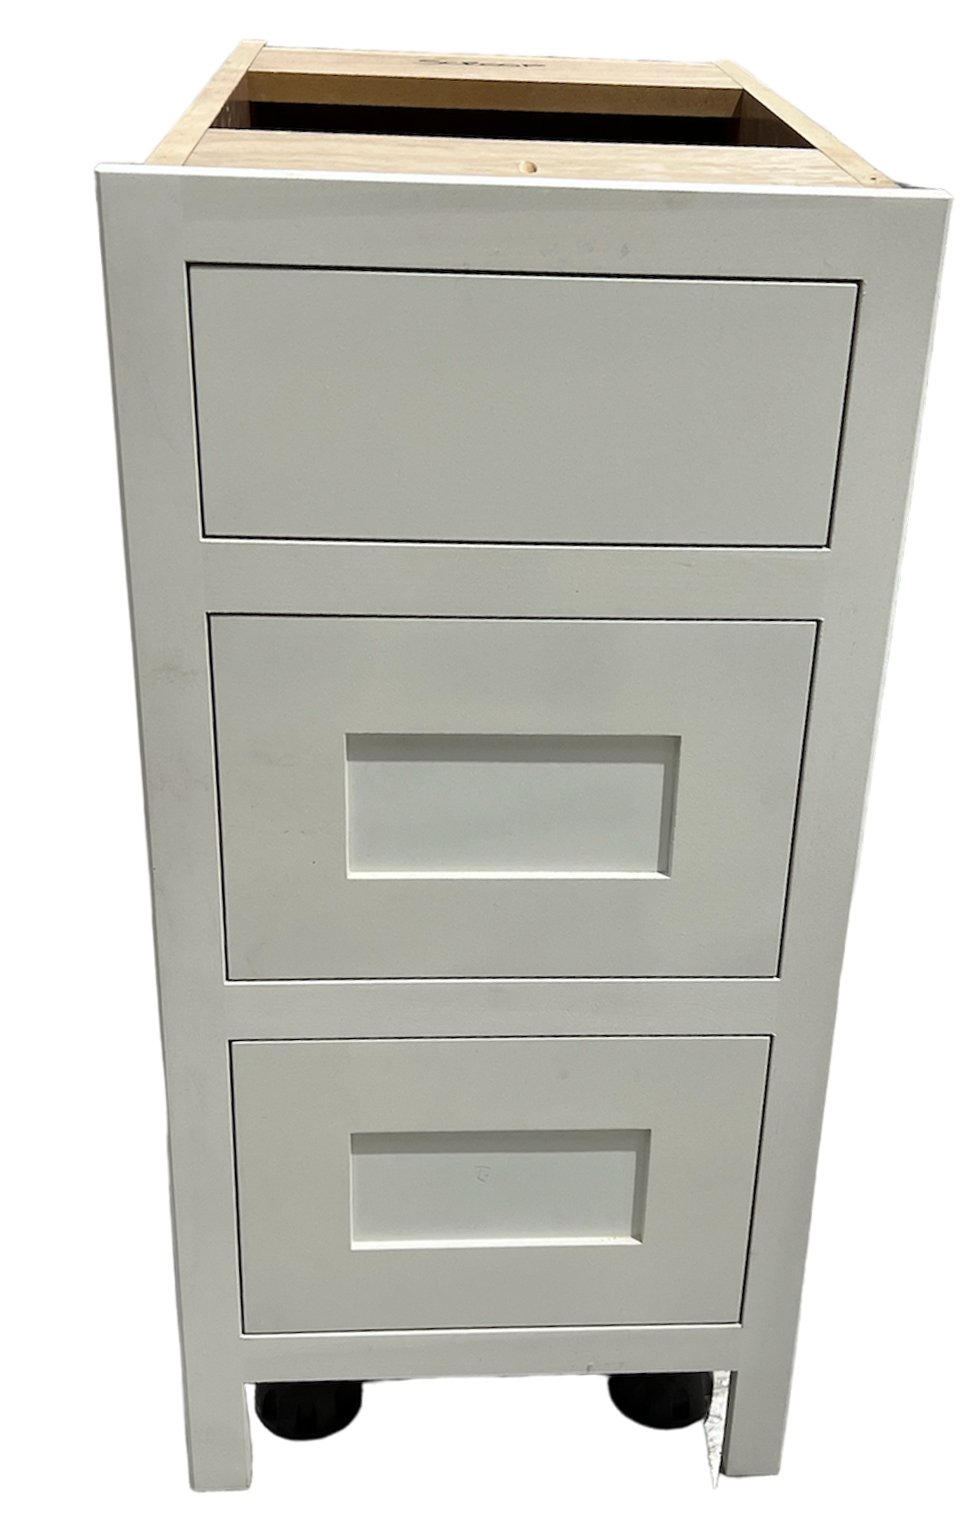 BD3 500 - 500mm Wide 3 drawer base unit - Classic Kitchens Direct